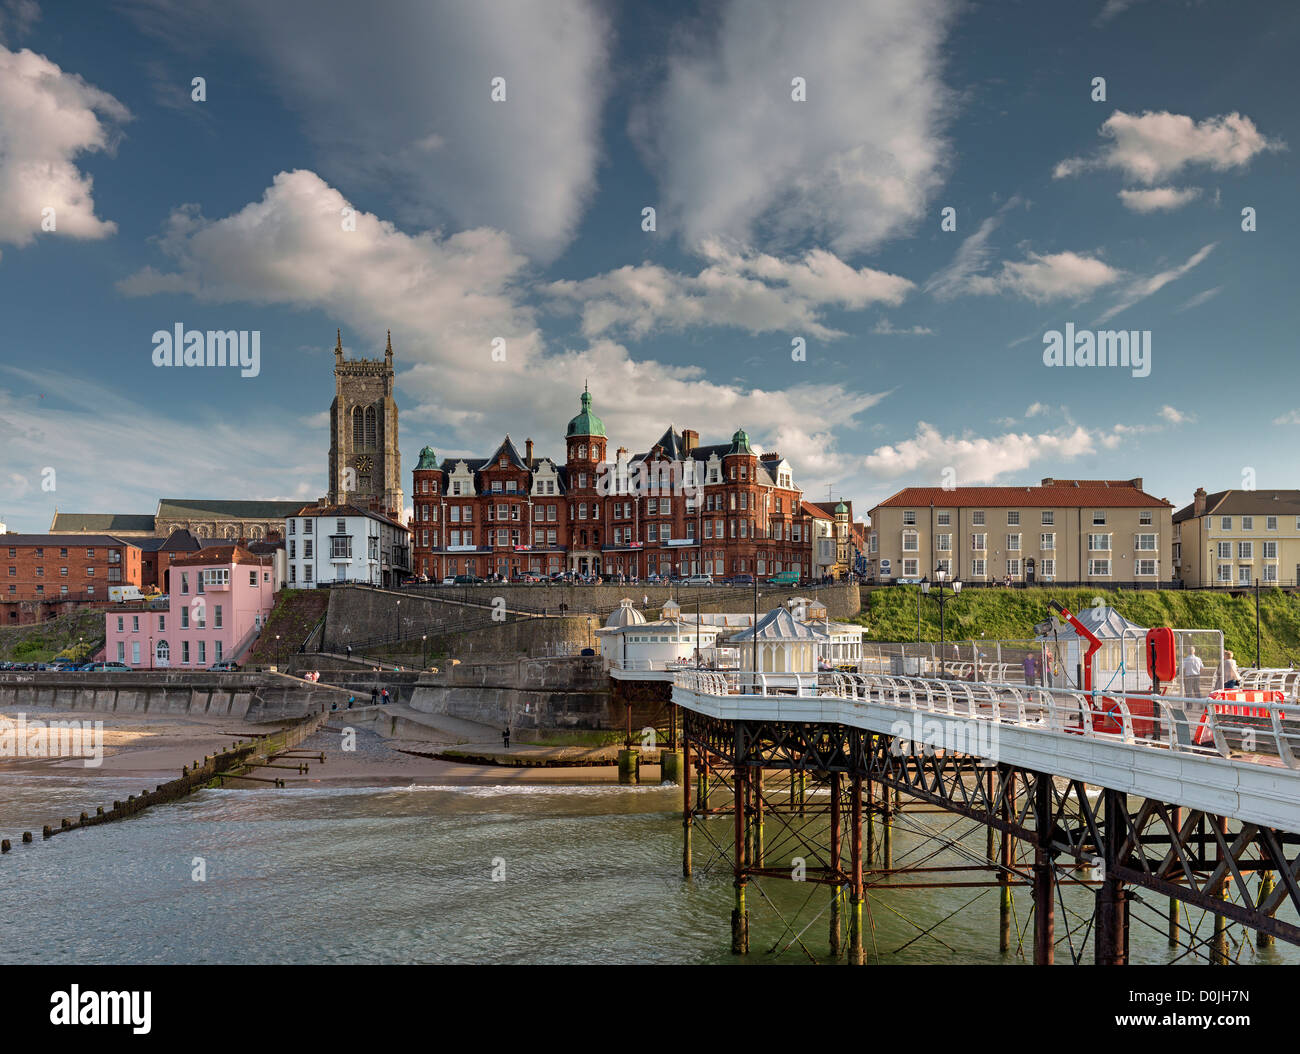 Looking back up the pier at Cromer in Norfolk. Stock Photo